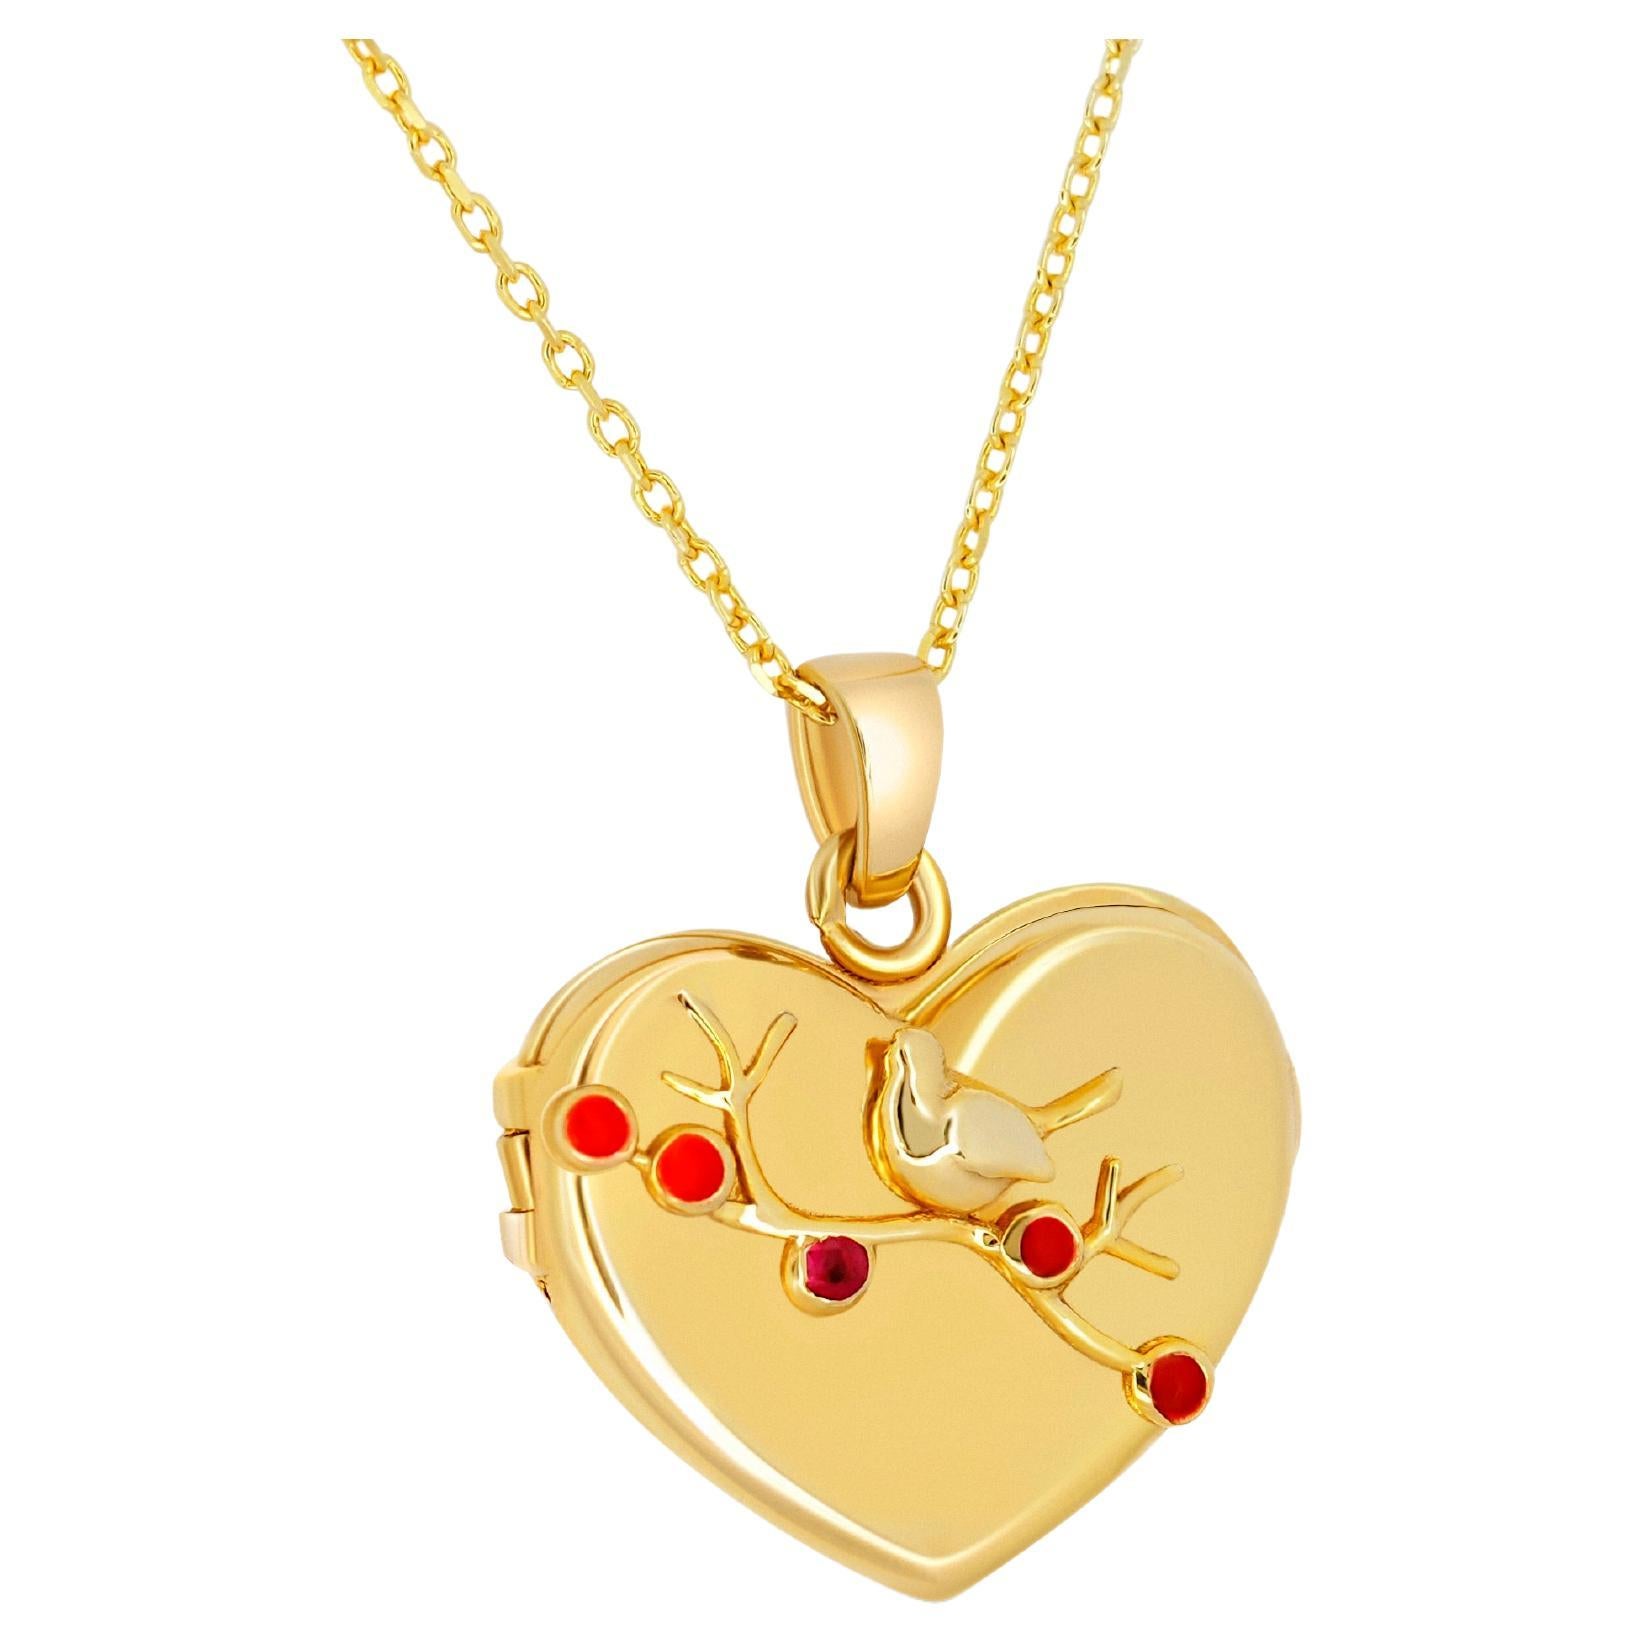 Heart Locket Charm Necklace in 14k gold 